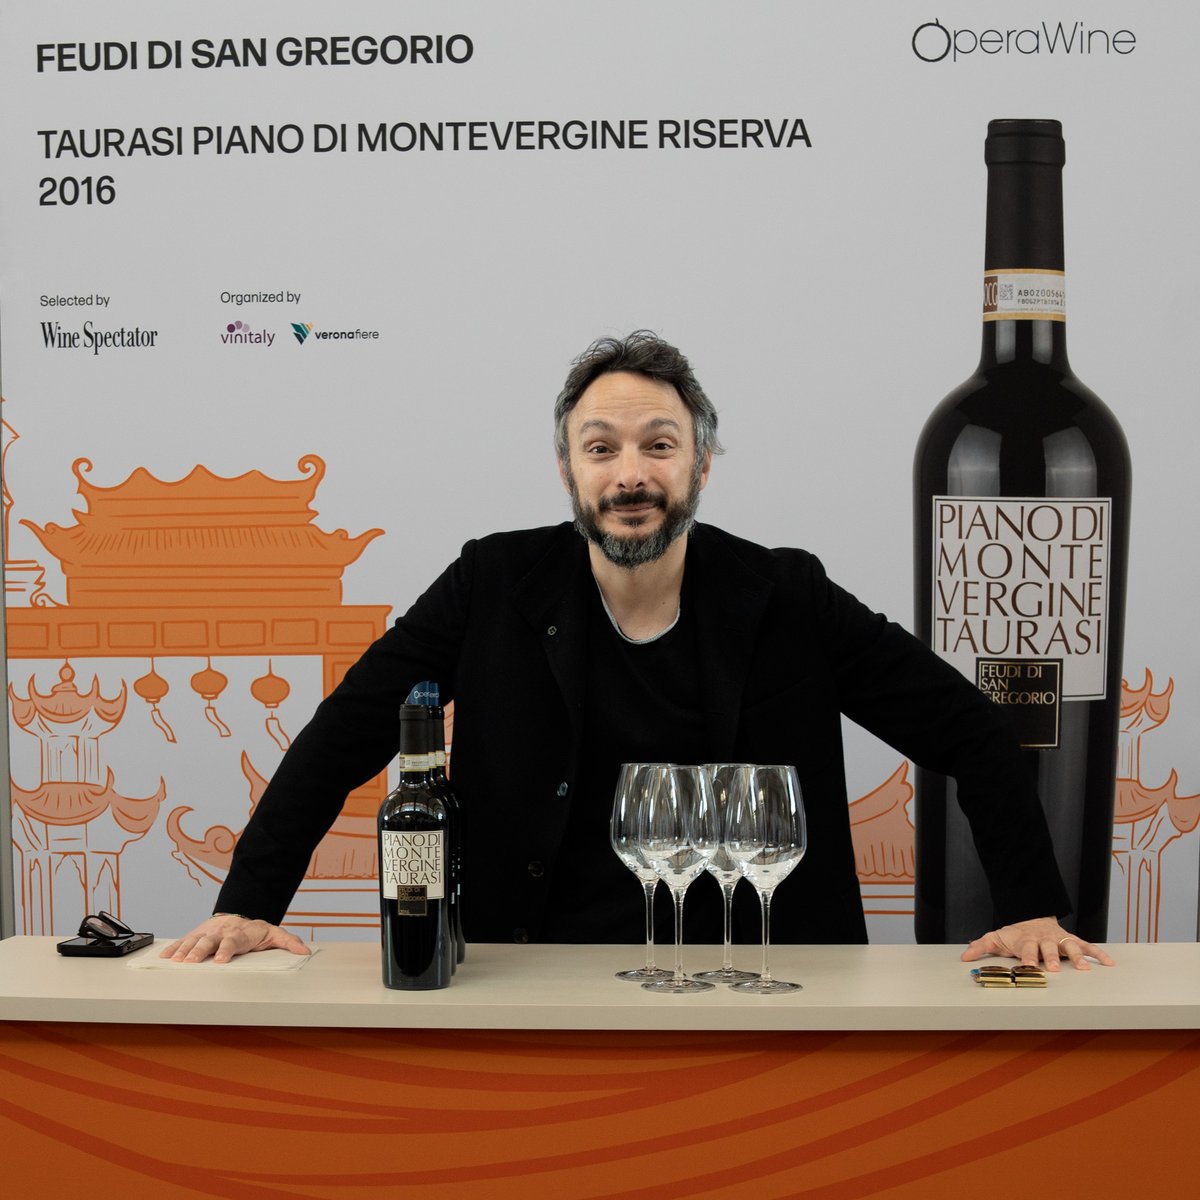 Here is the portrait of @FeudiDSGregorio, one of the great Italian producers selected by Wine Spectator for #OperaWine2024. During this year's Grand Tasting, they shared with guests their Taurasi Piano di Montevergine Riserva 2016. Congratulations! #Vinitaly2024